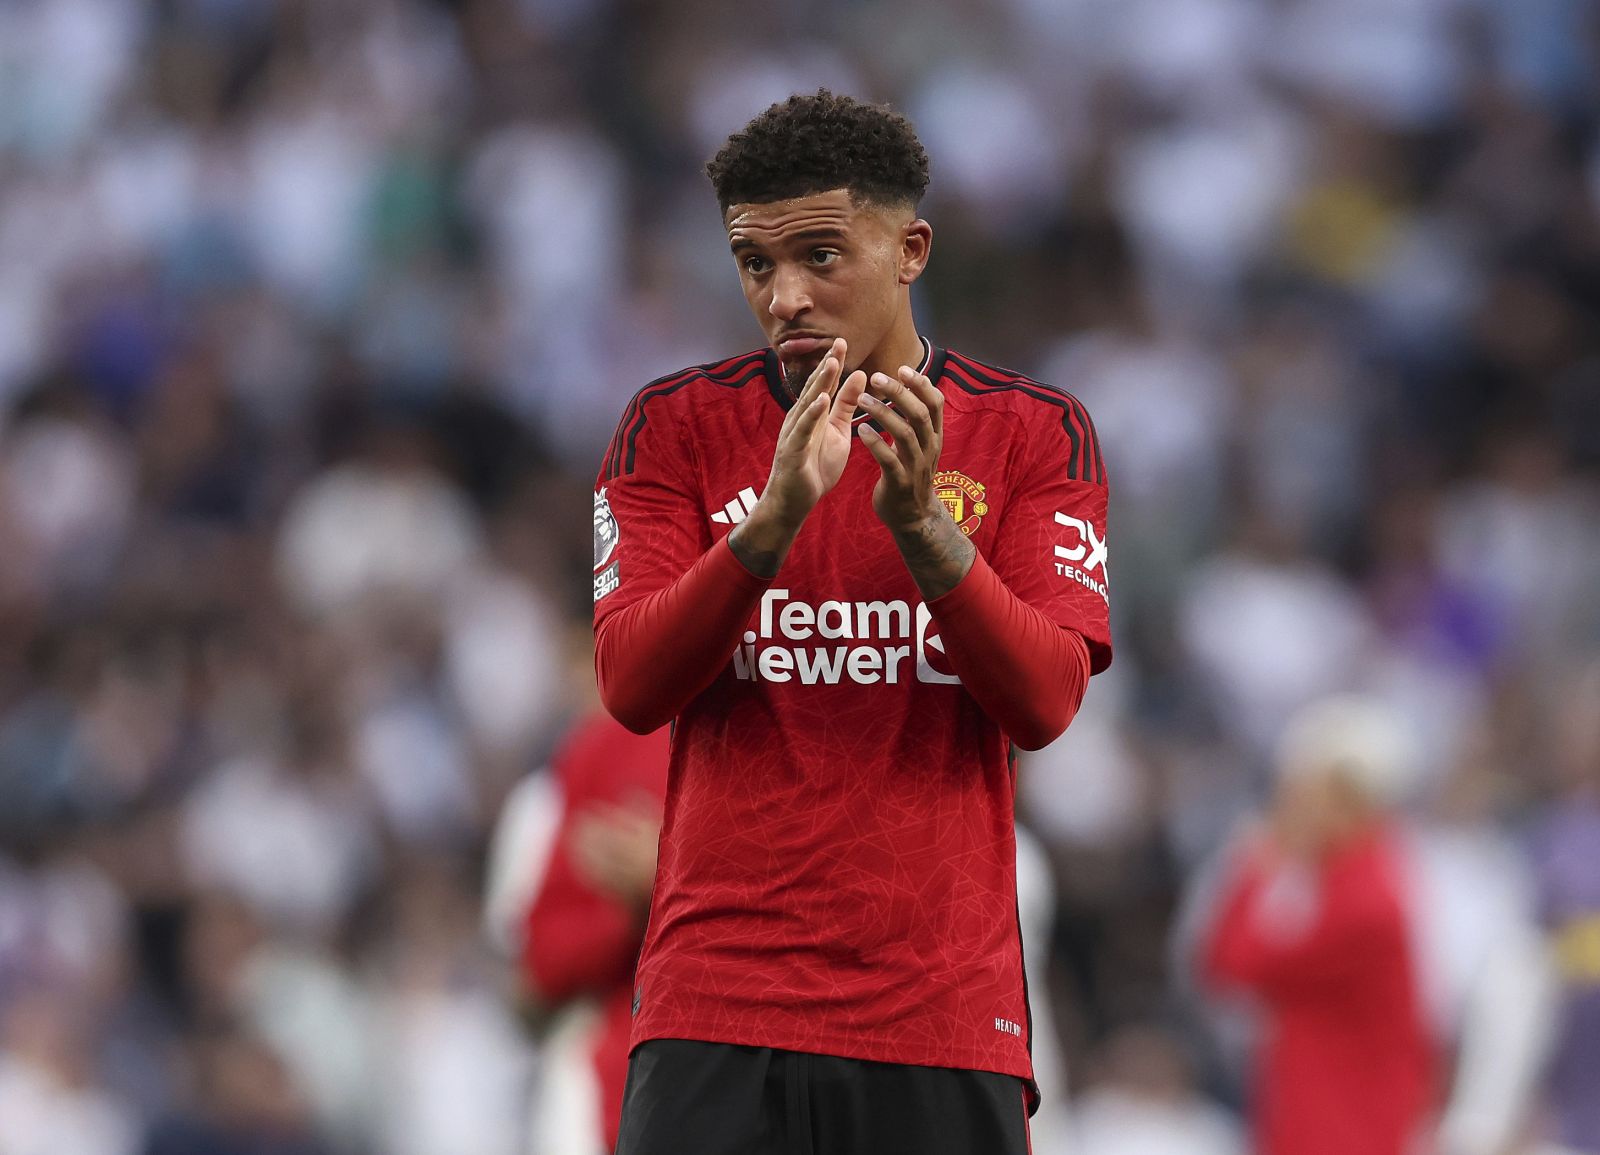 August 19, 2023, London: London, England, 19th August 2023. Jadon Sancho of Manchester United reacts after the Premier League match at the Tottenham Hotspur Stadium, London. (Credit Image: Â© Paul Terry/Sportimage/Cal Sport Media) (Cal Sport Media via AP Images)